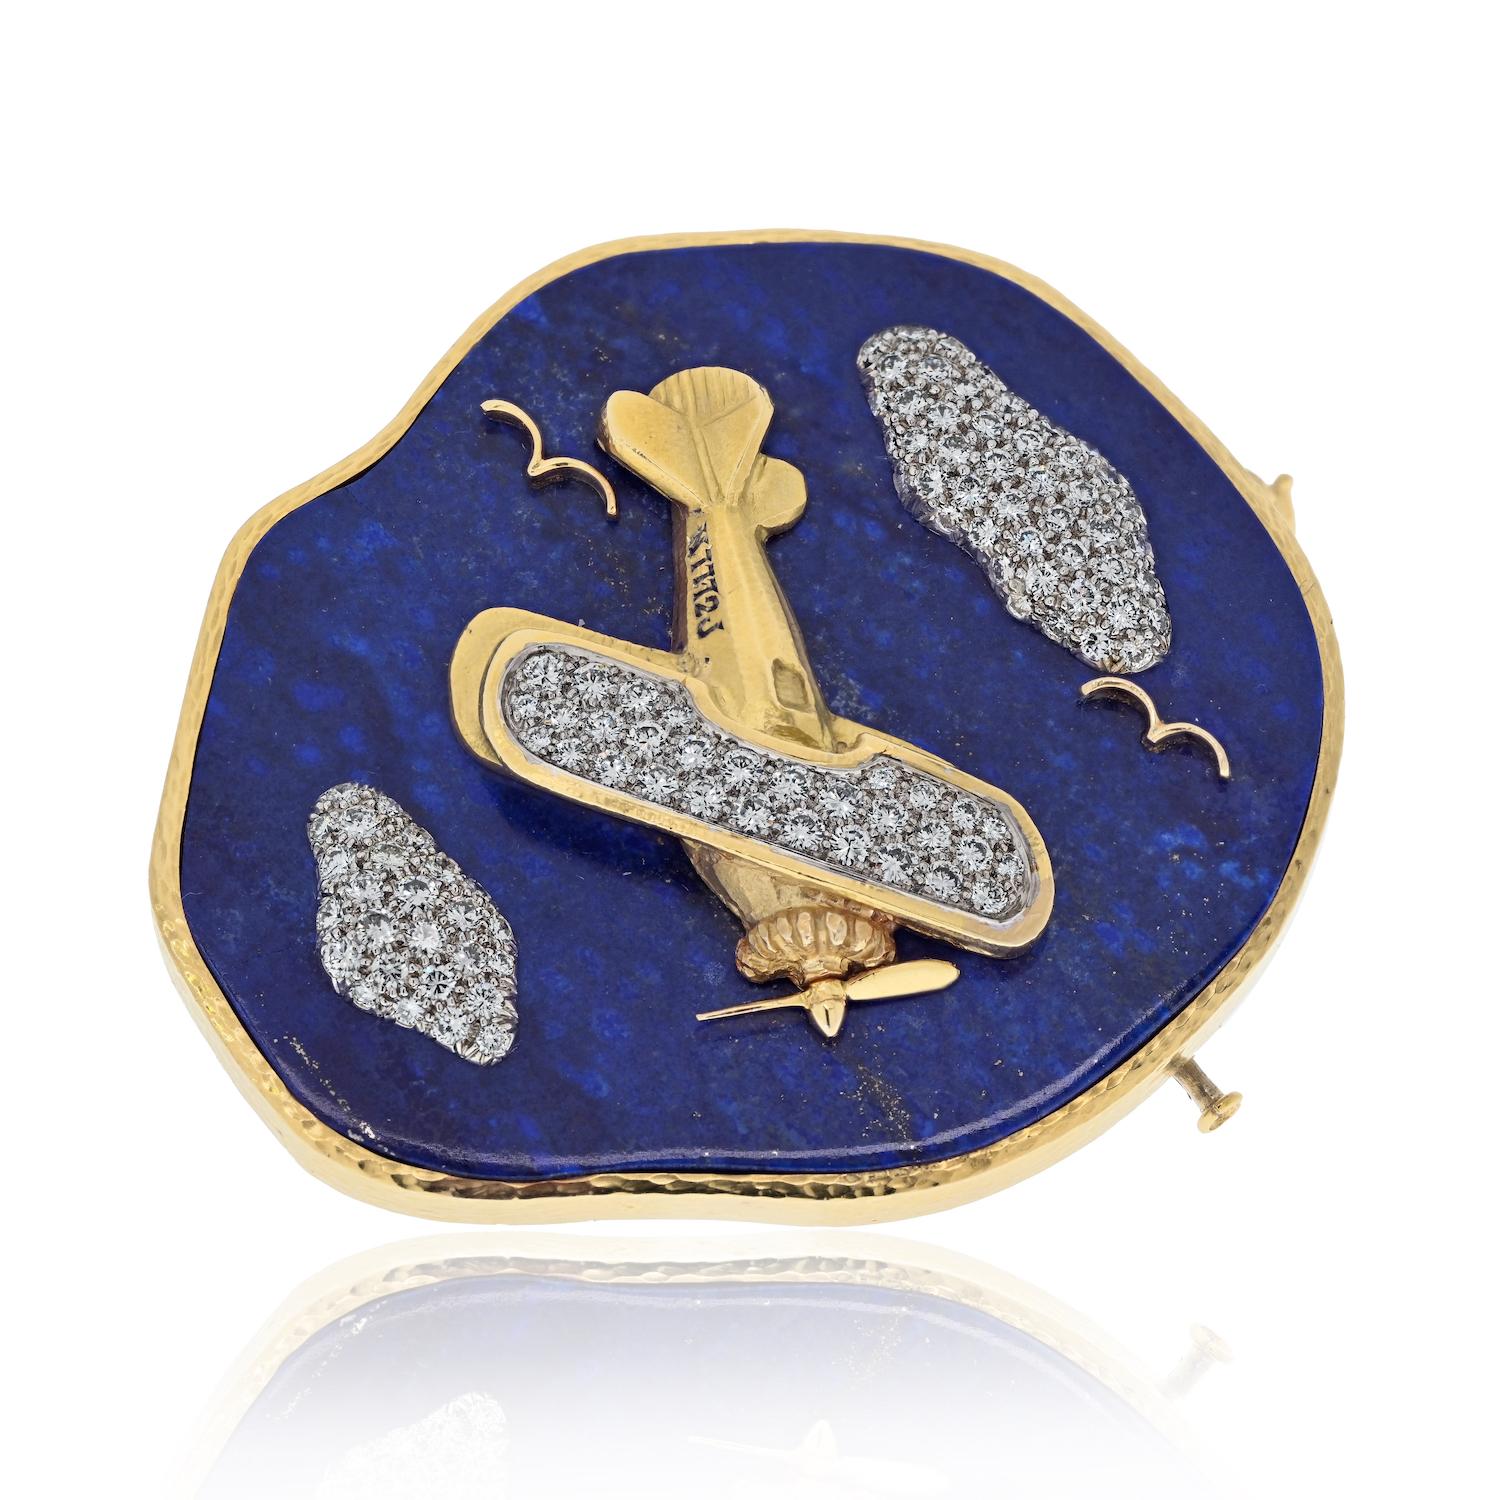 Prepare to be mesmerized by the exquisite craftsmanship and artistic flair of this David Webb brooch. Handcrafted in 18k yellow gold and platinum, this brooch is a true testament to the iconic style and innovation for which David Webb is